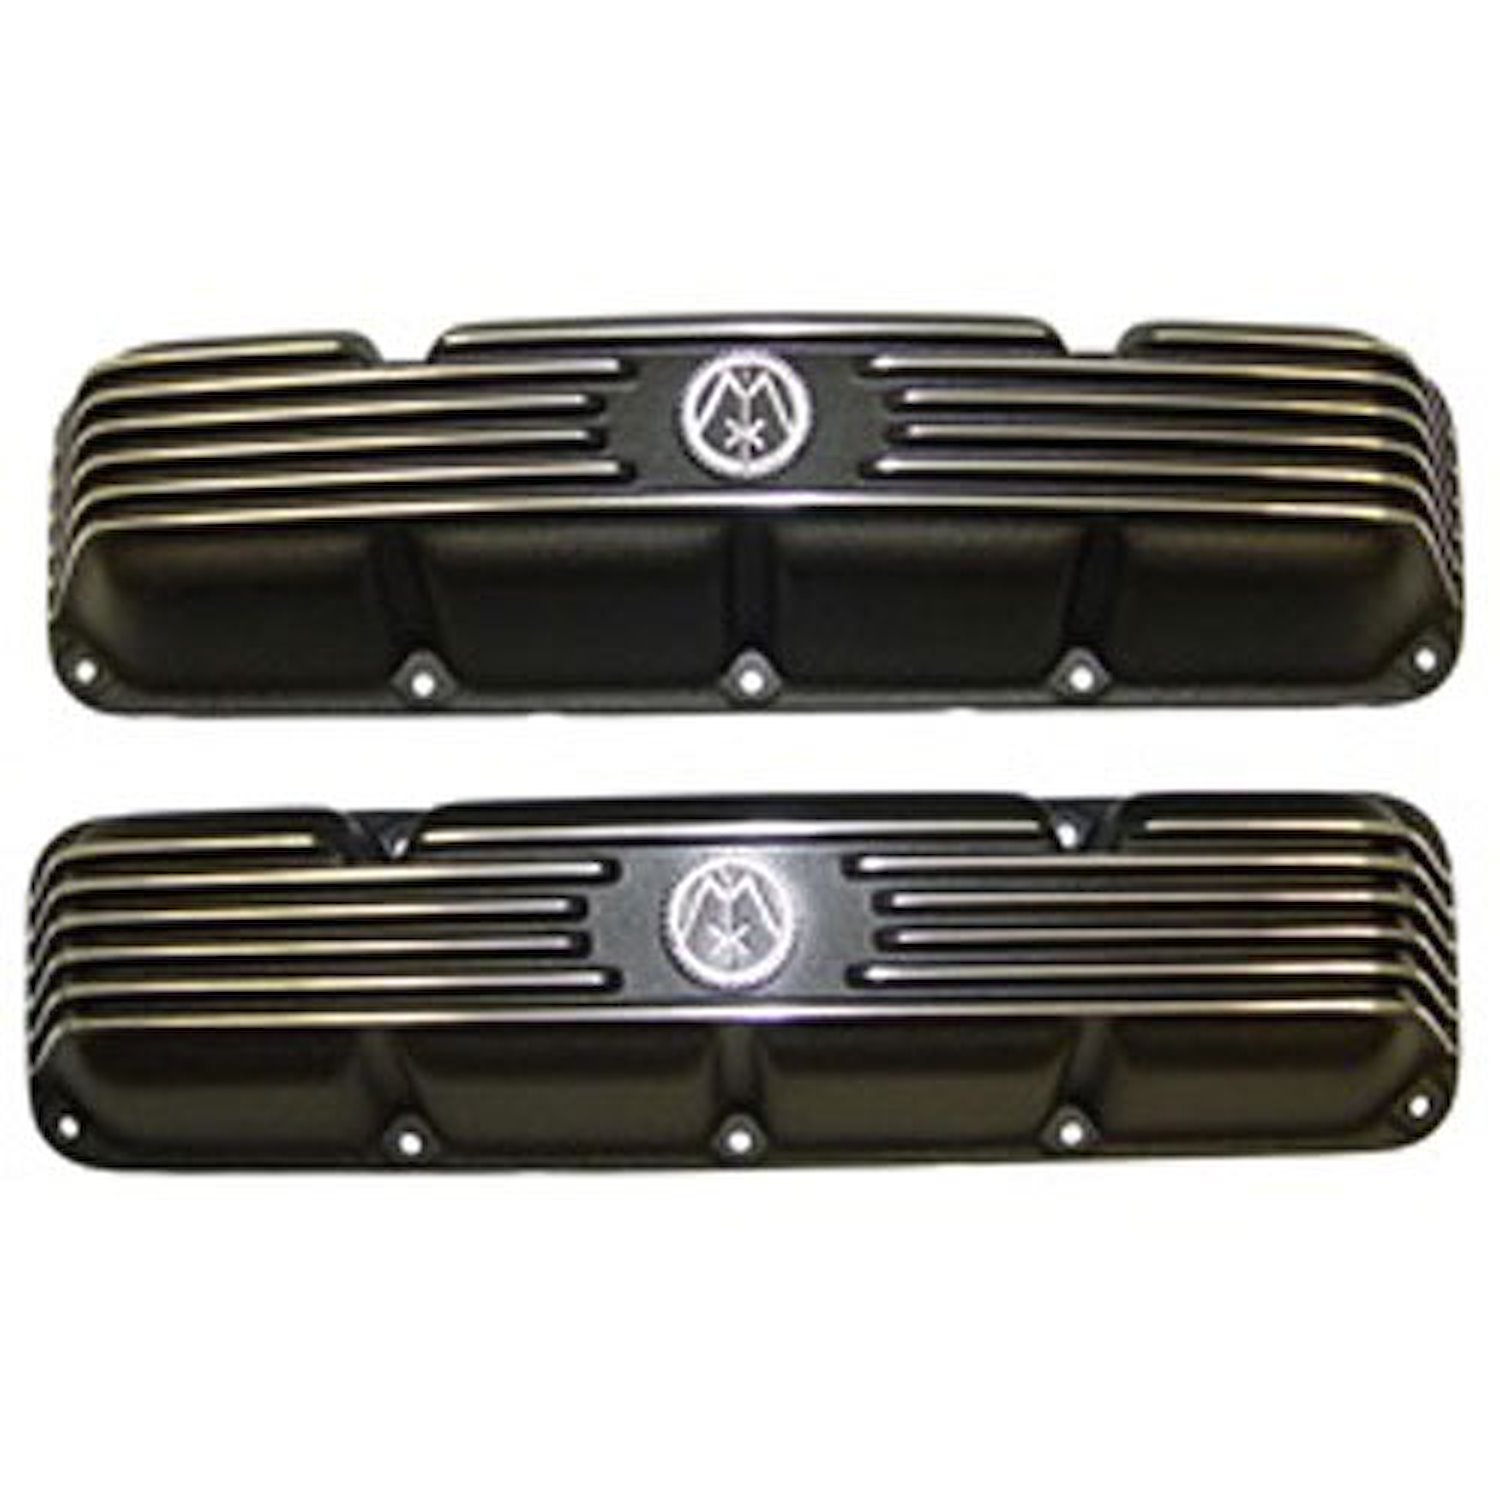 This valve cover gasket kit from Omix-ADA fits